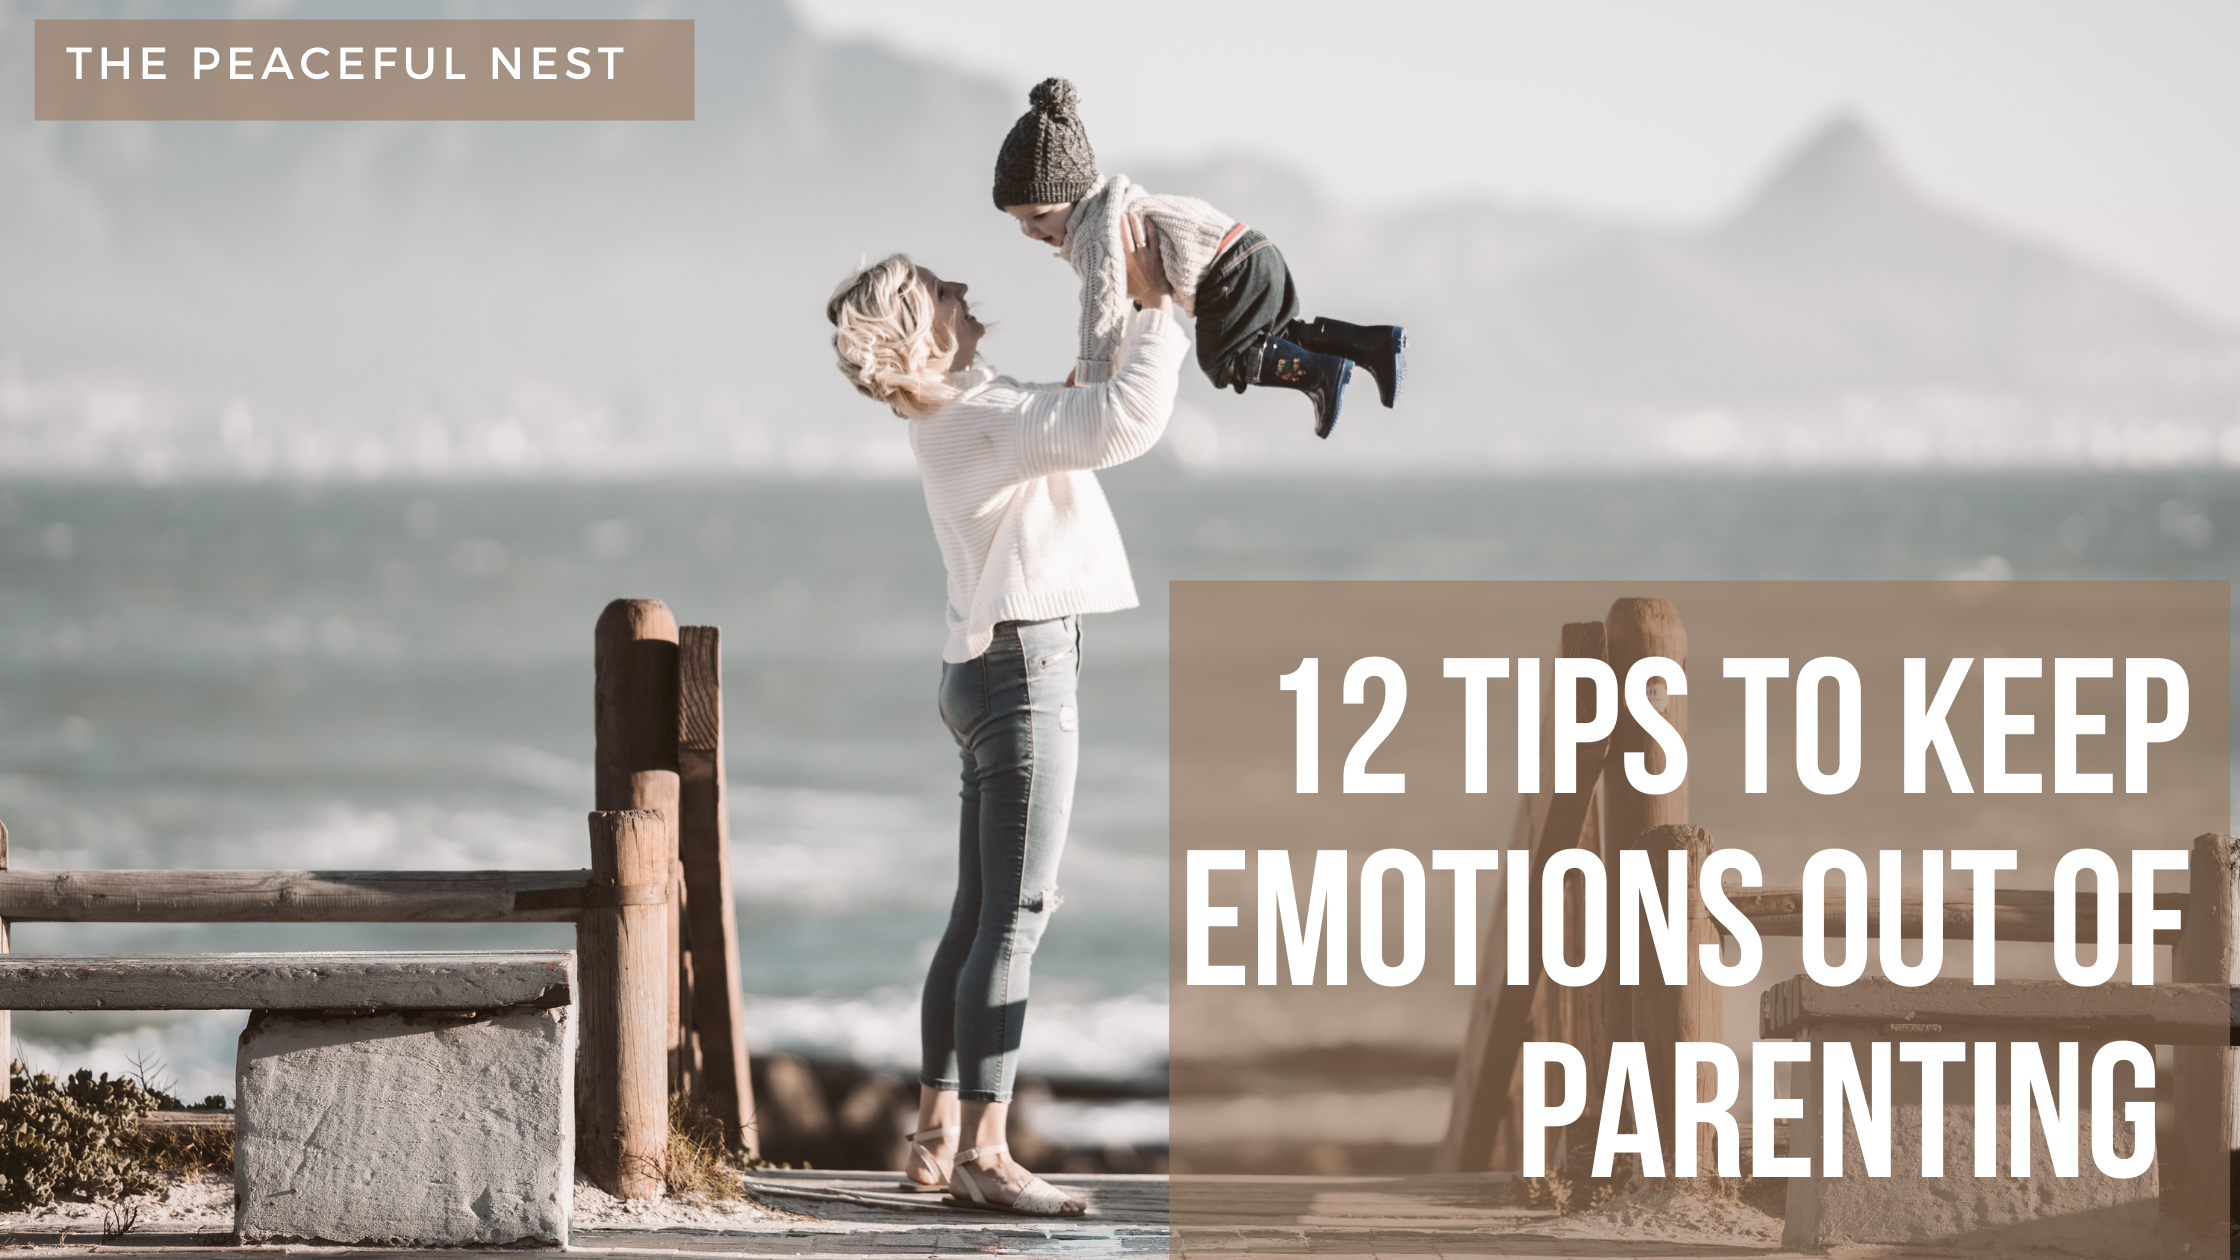 12 Ways to Keep Emotions out of Parenting